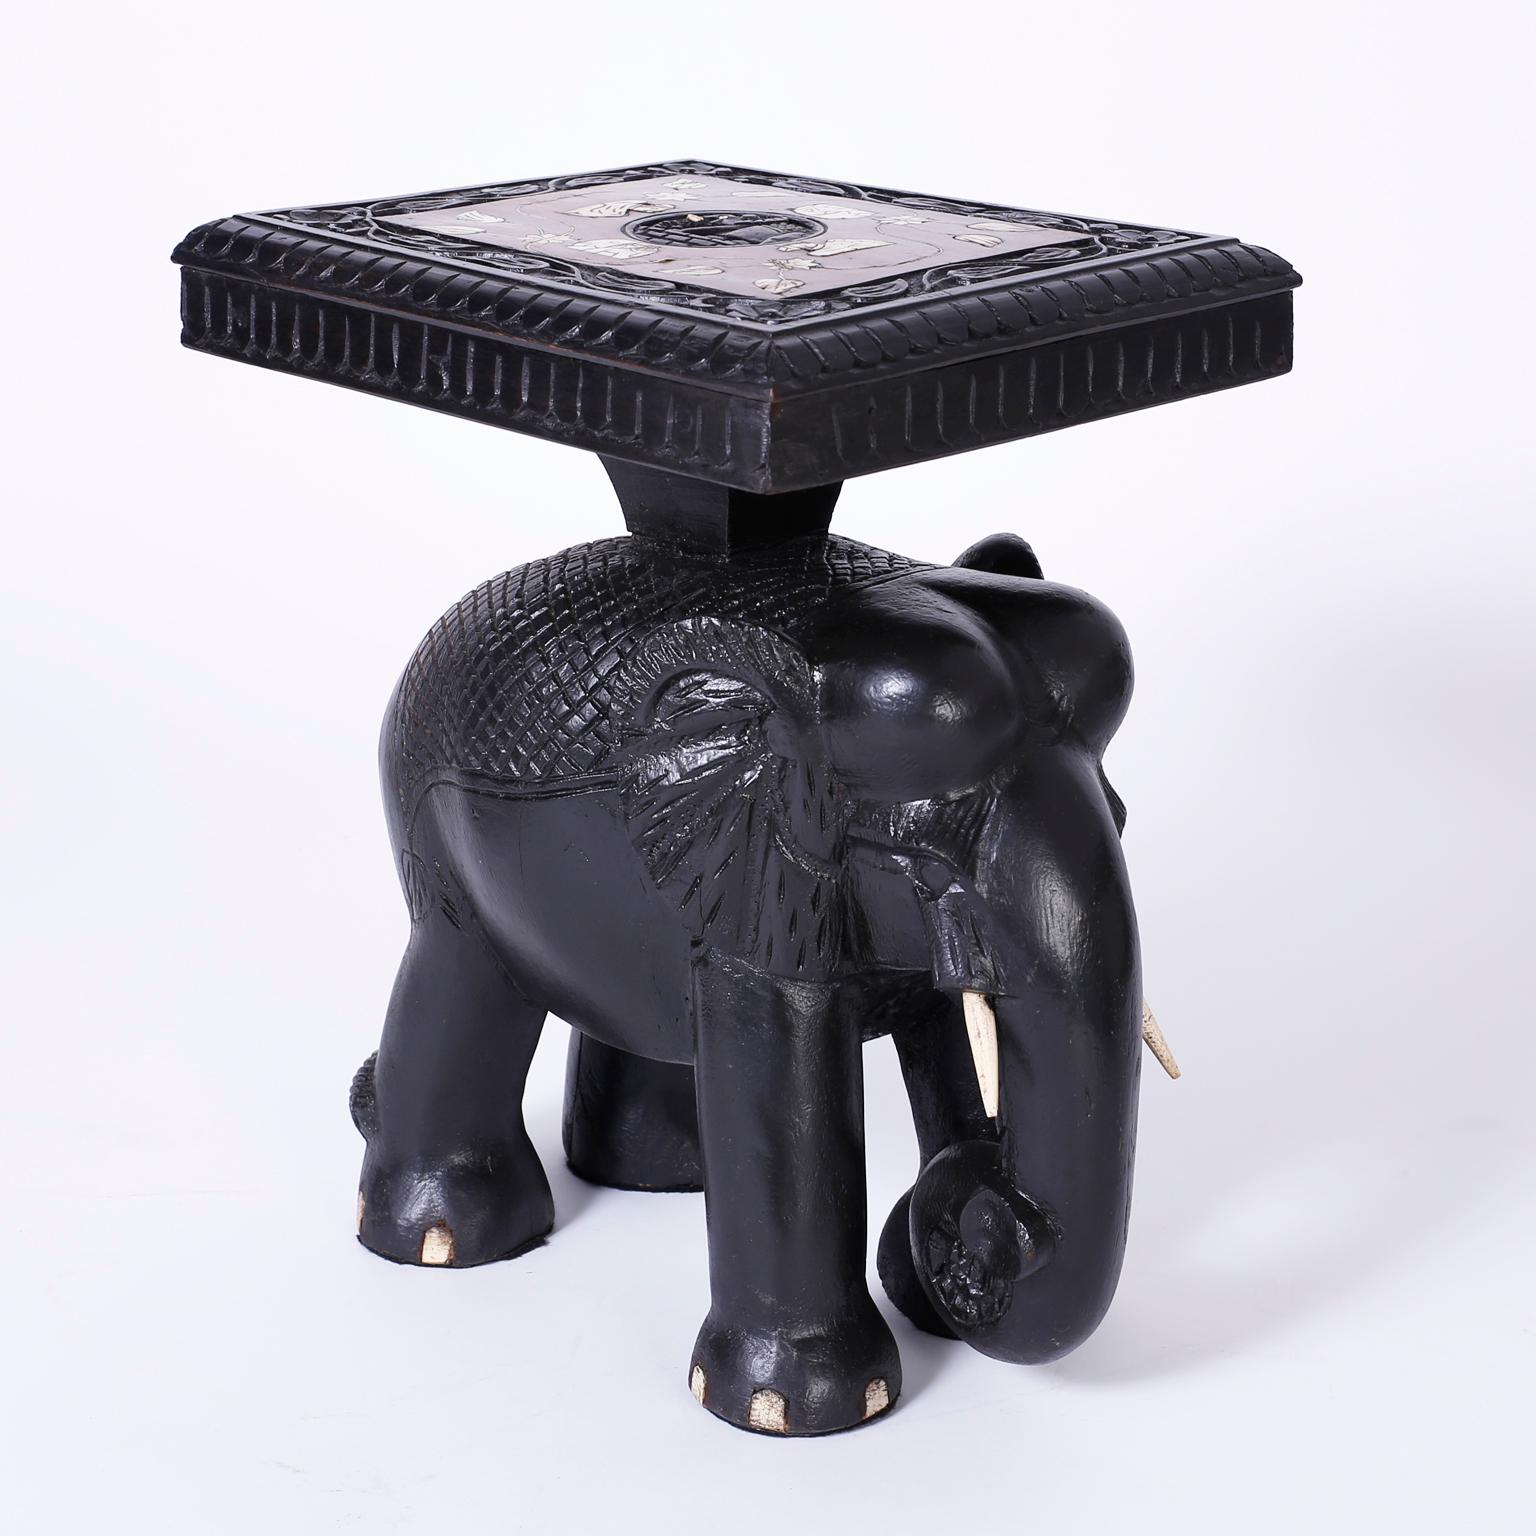 Exotic pair of end tables or stands each with floral bone inlays on rosewood tops and ebonized hand carved borders on carved wood elephant bases with bone tusks. A matching coffee table is also available, as seen in the last photo of the listing.